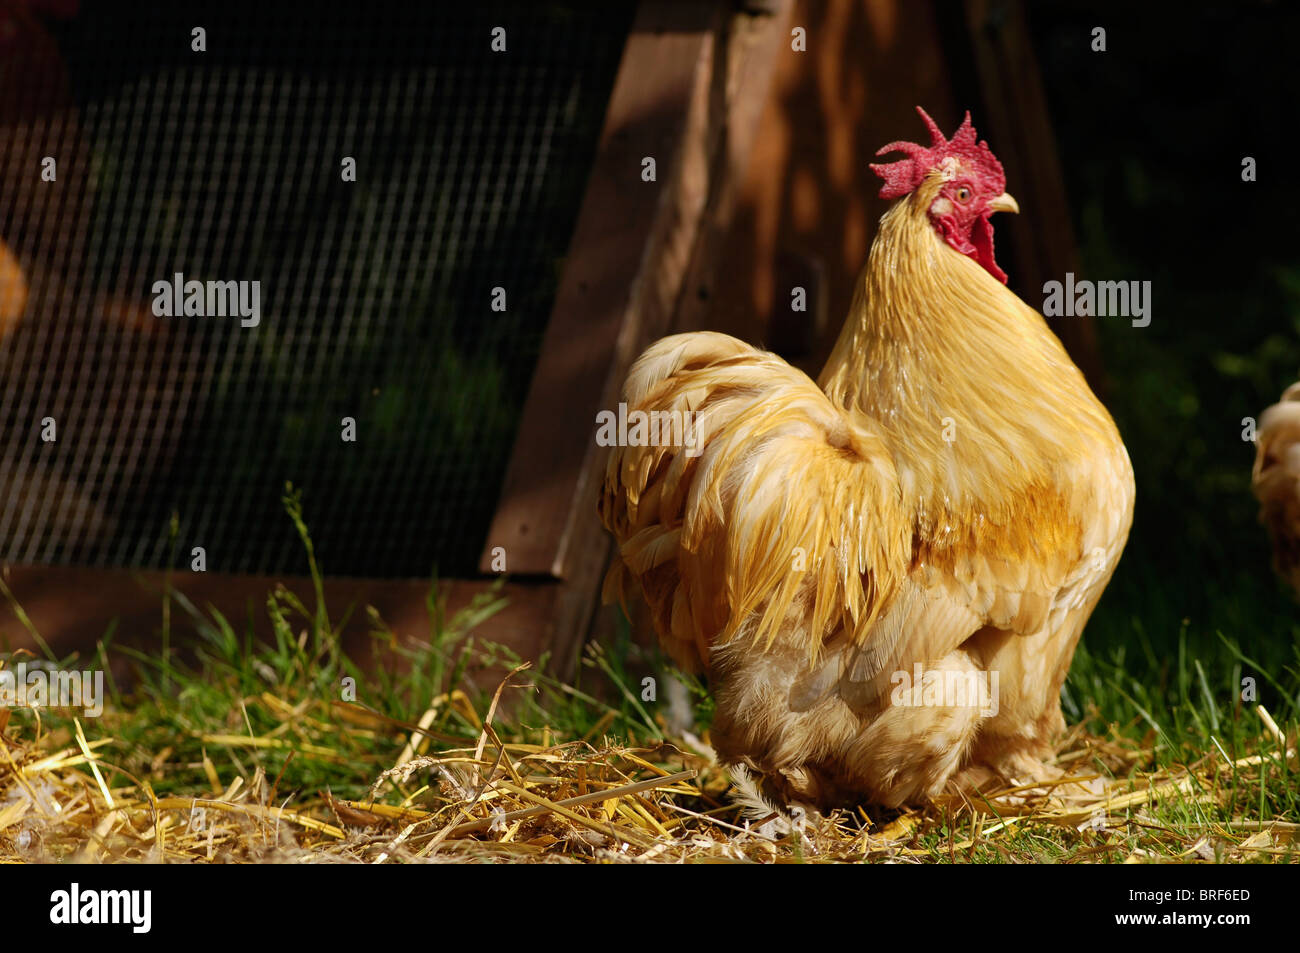 View of chicken on grass Stock Photo